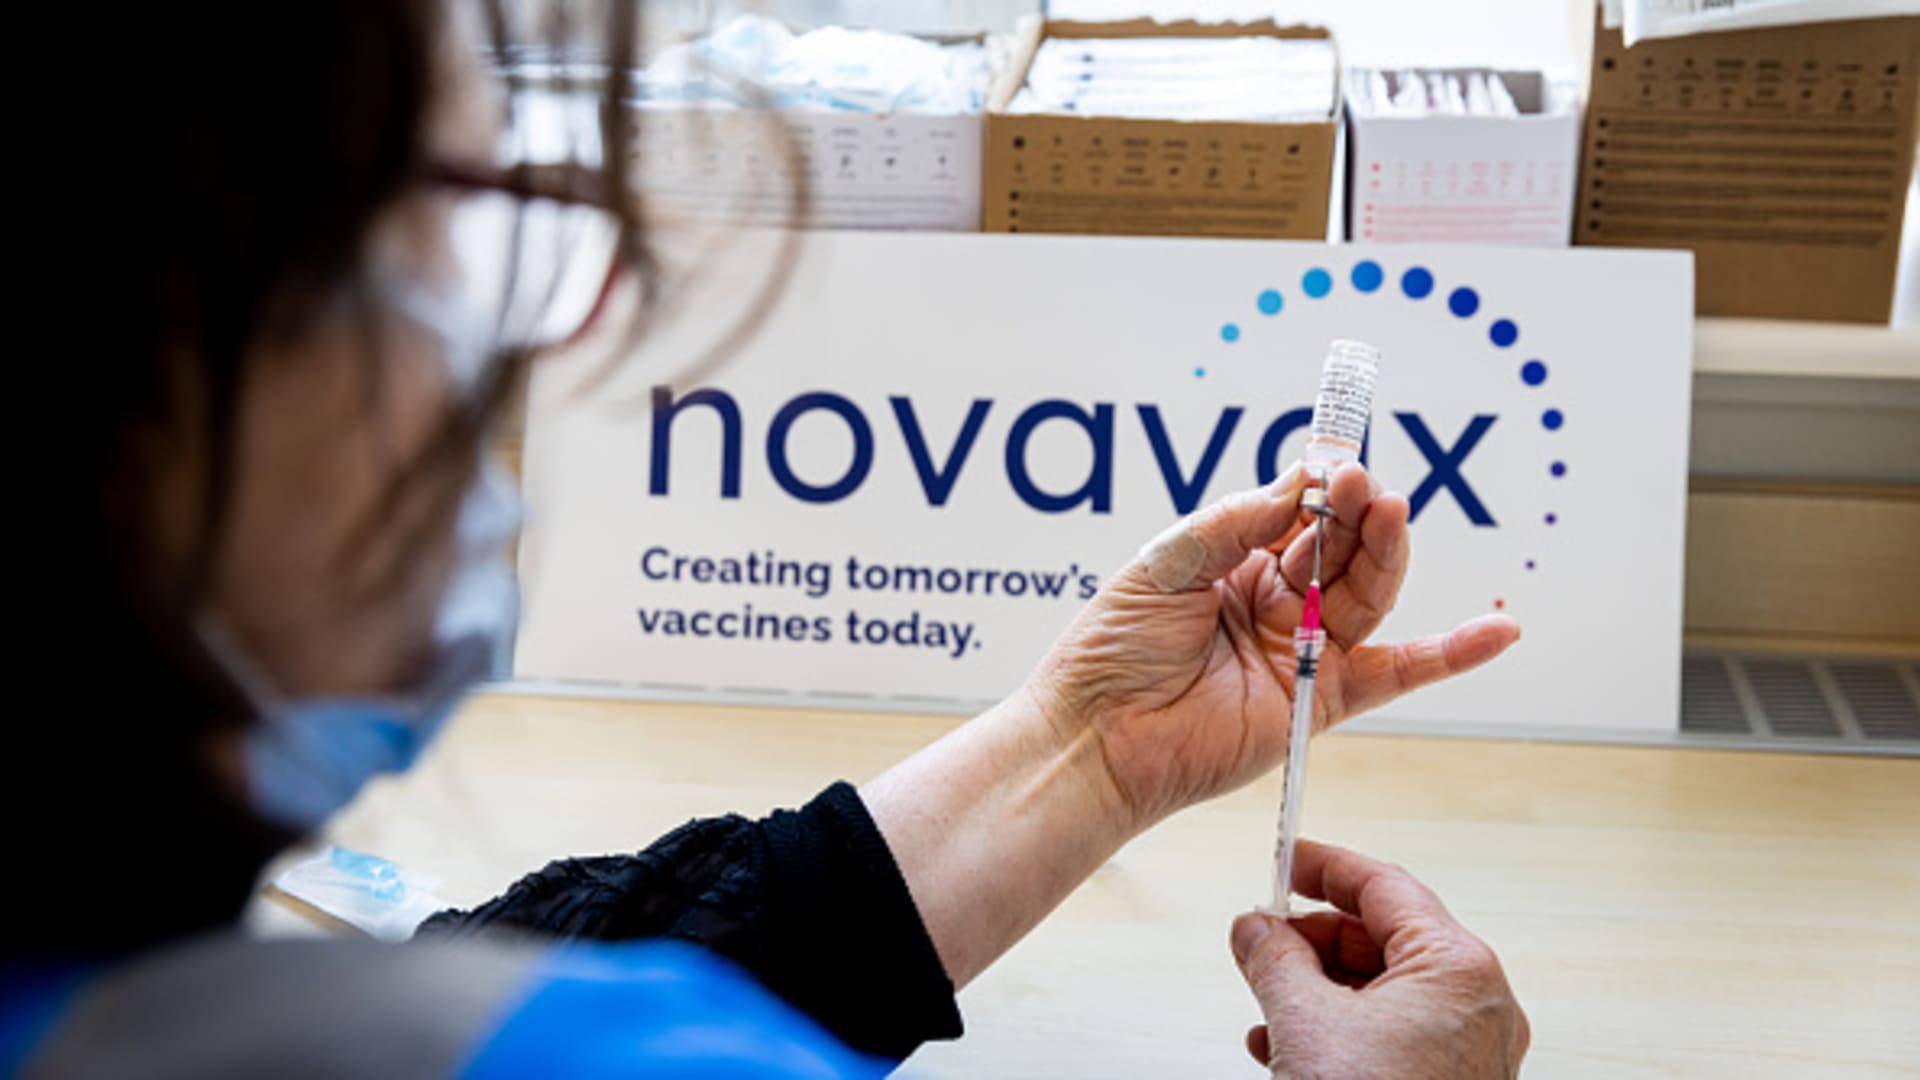 A health worker prepares a dose of the Novavax vaccine as the Dutch Health Service Organization starts with the Novavax vaccination program on March 21, 2022 in The Hague, Netherlands.